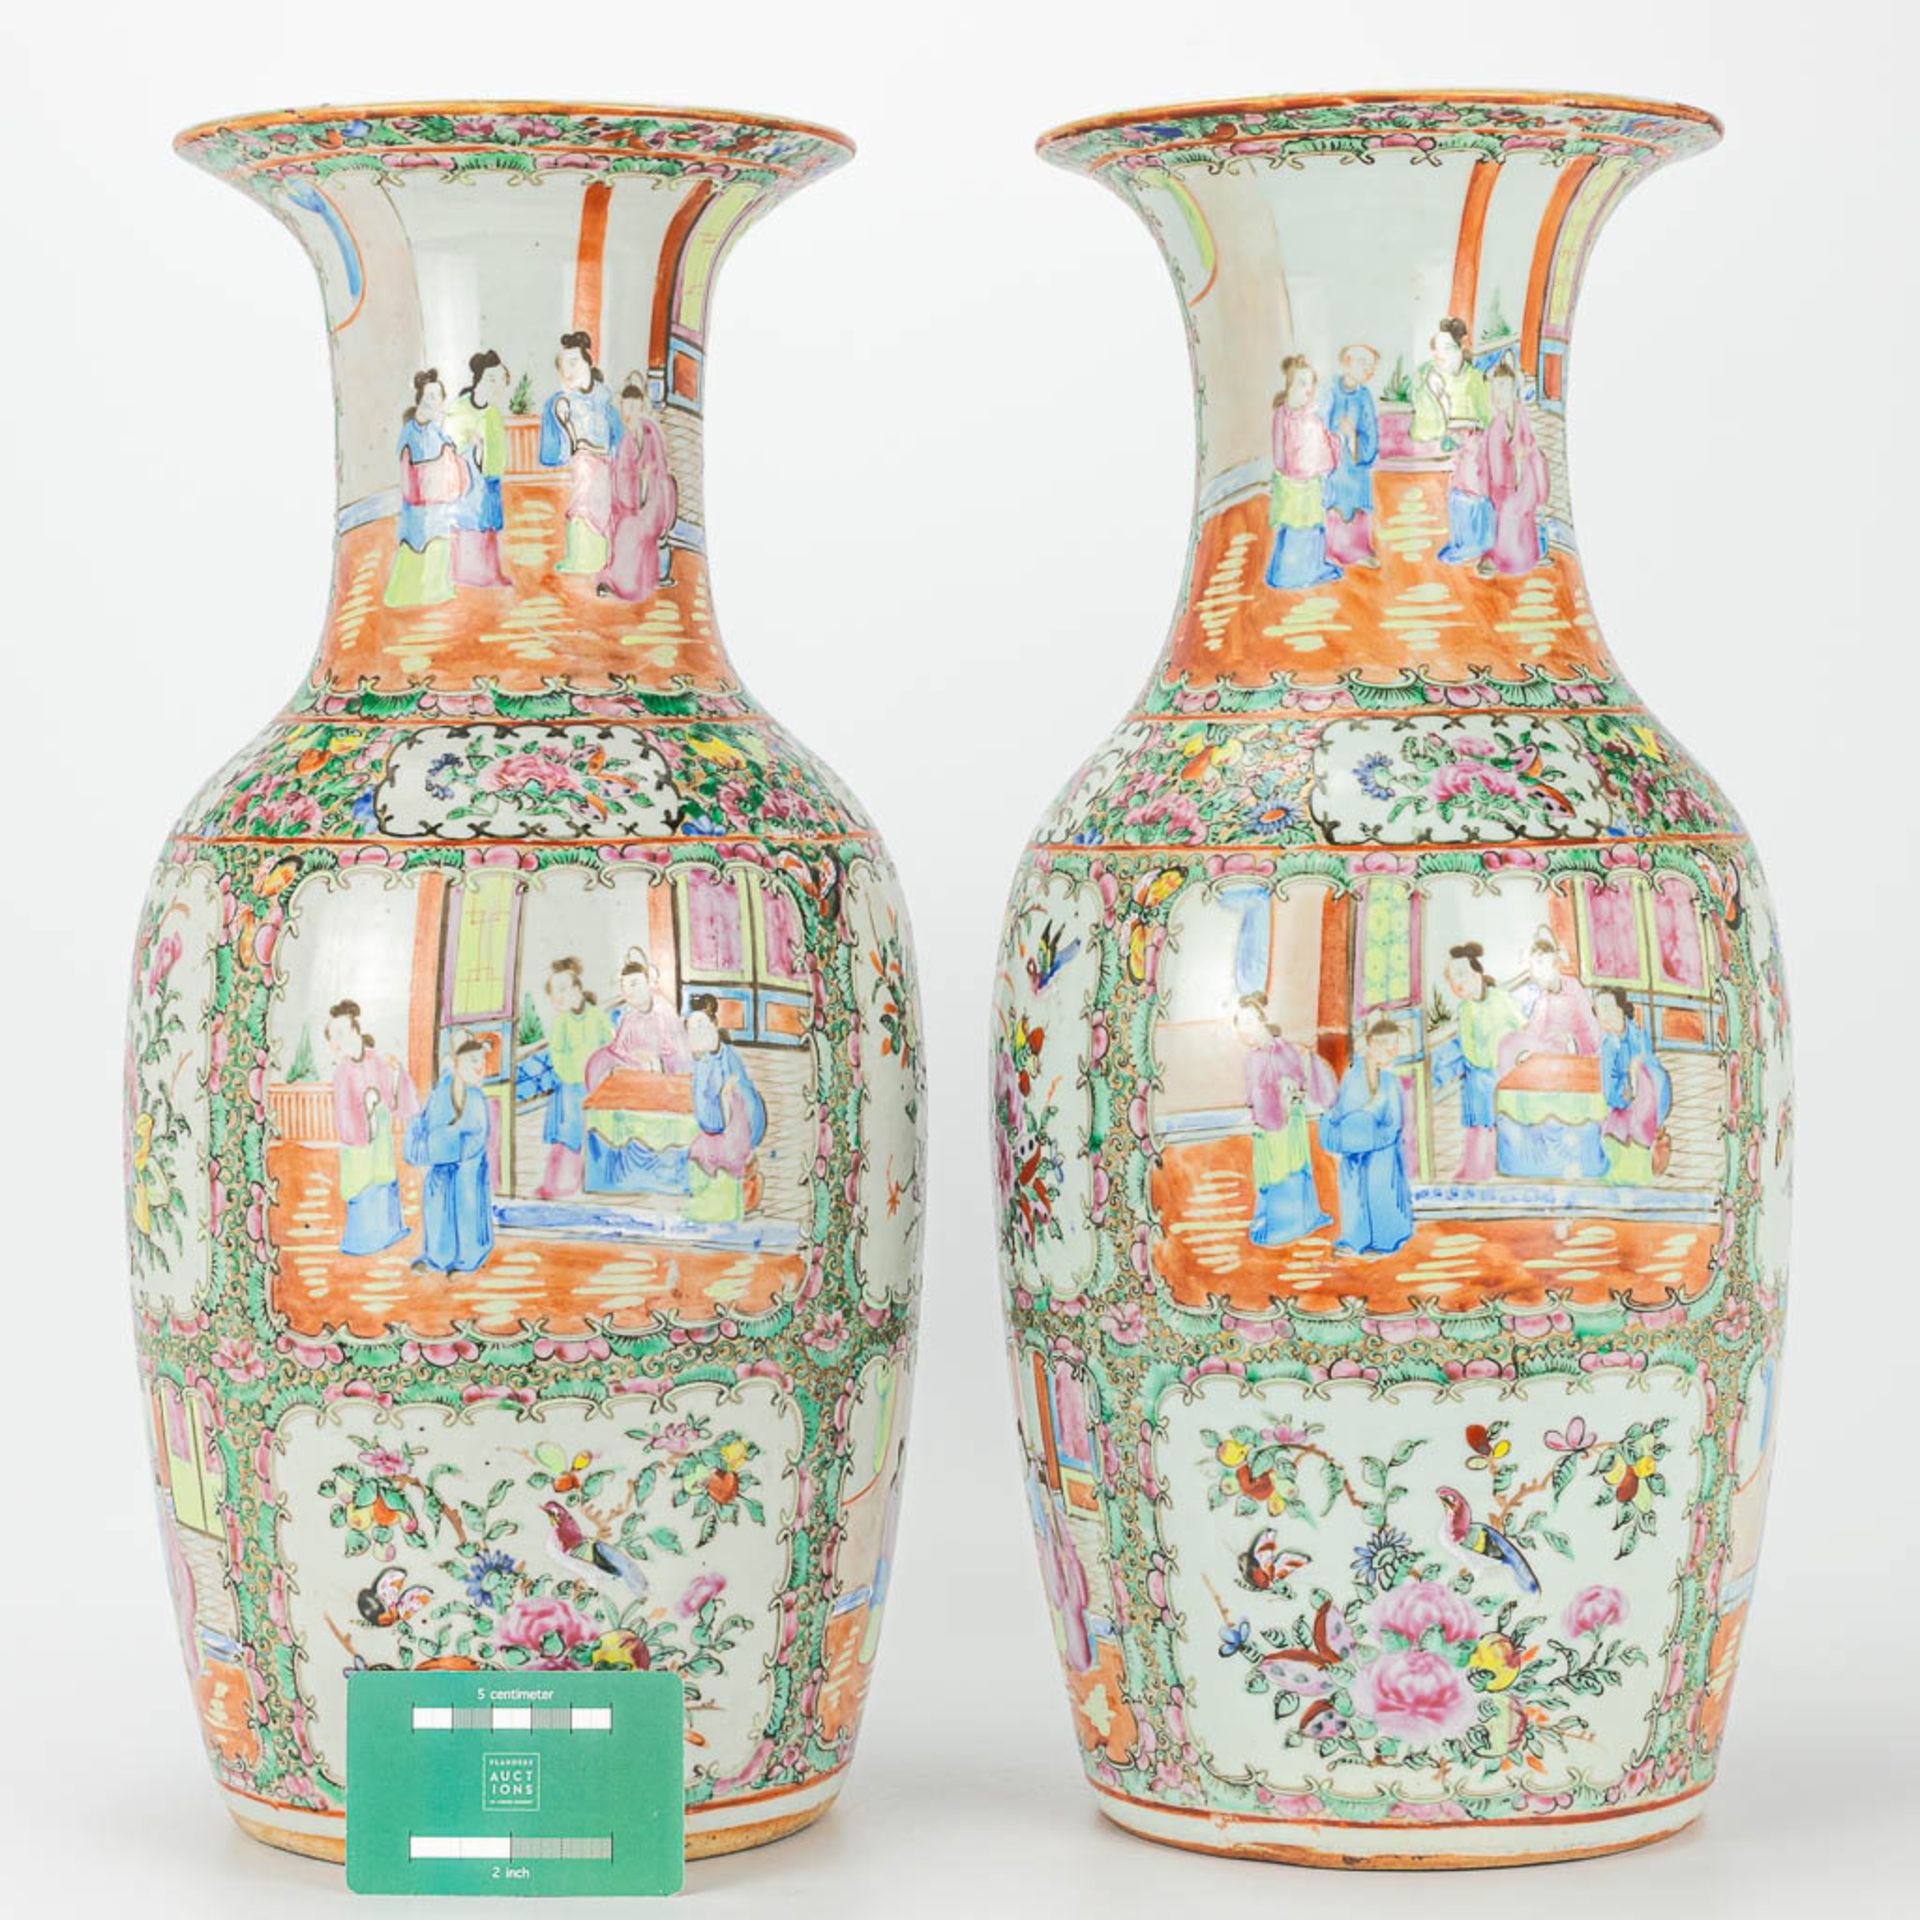 A pair of vases made of Chinese porcelain in Canton style. 19th century. - Image 11 of 17